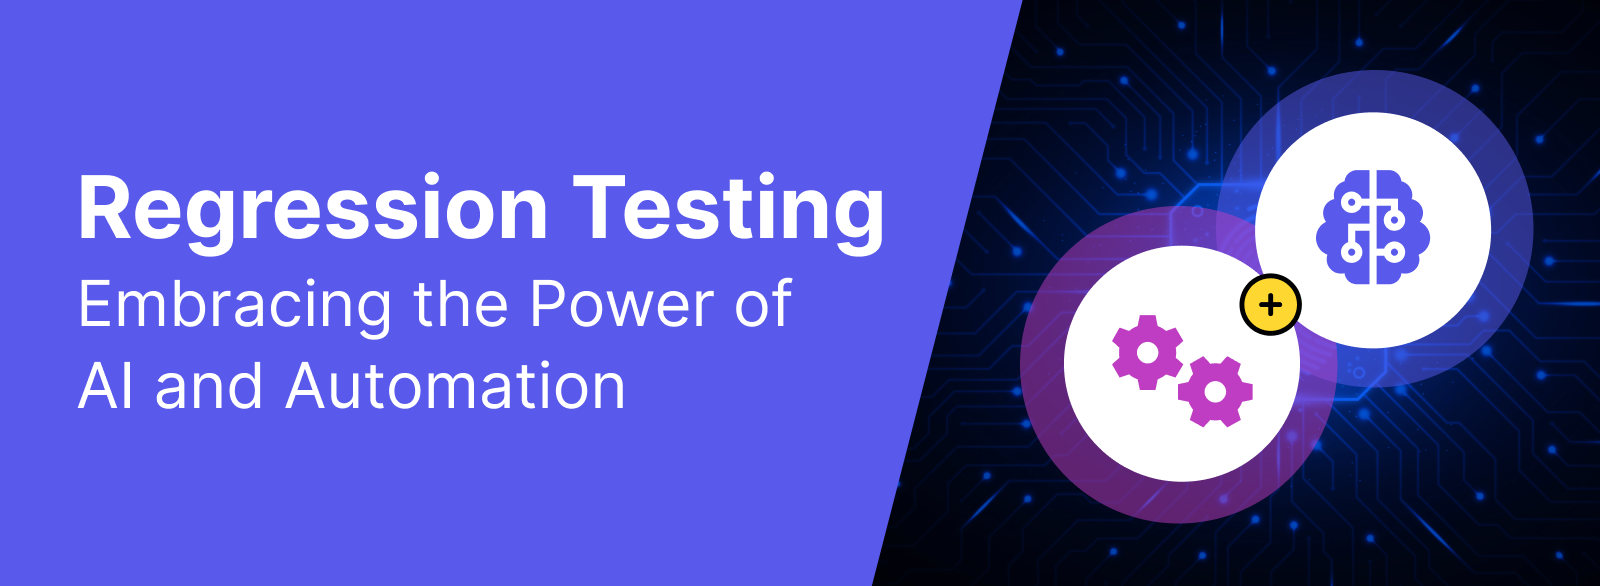 AI in regression testing | Embracing the power of AI and Automation | Katalon